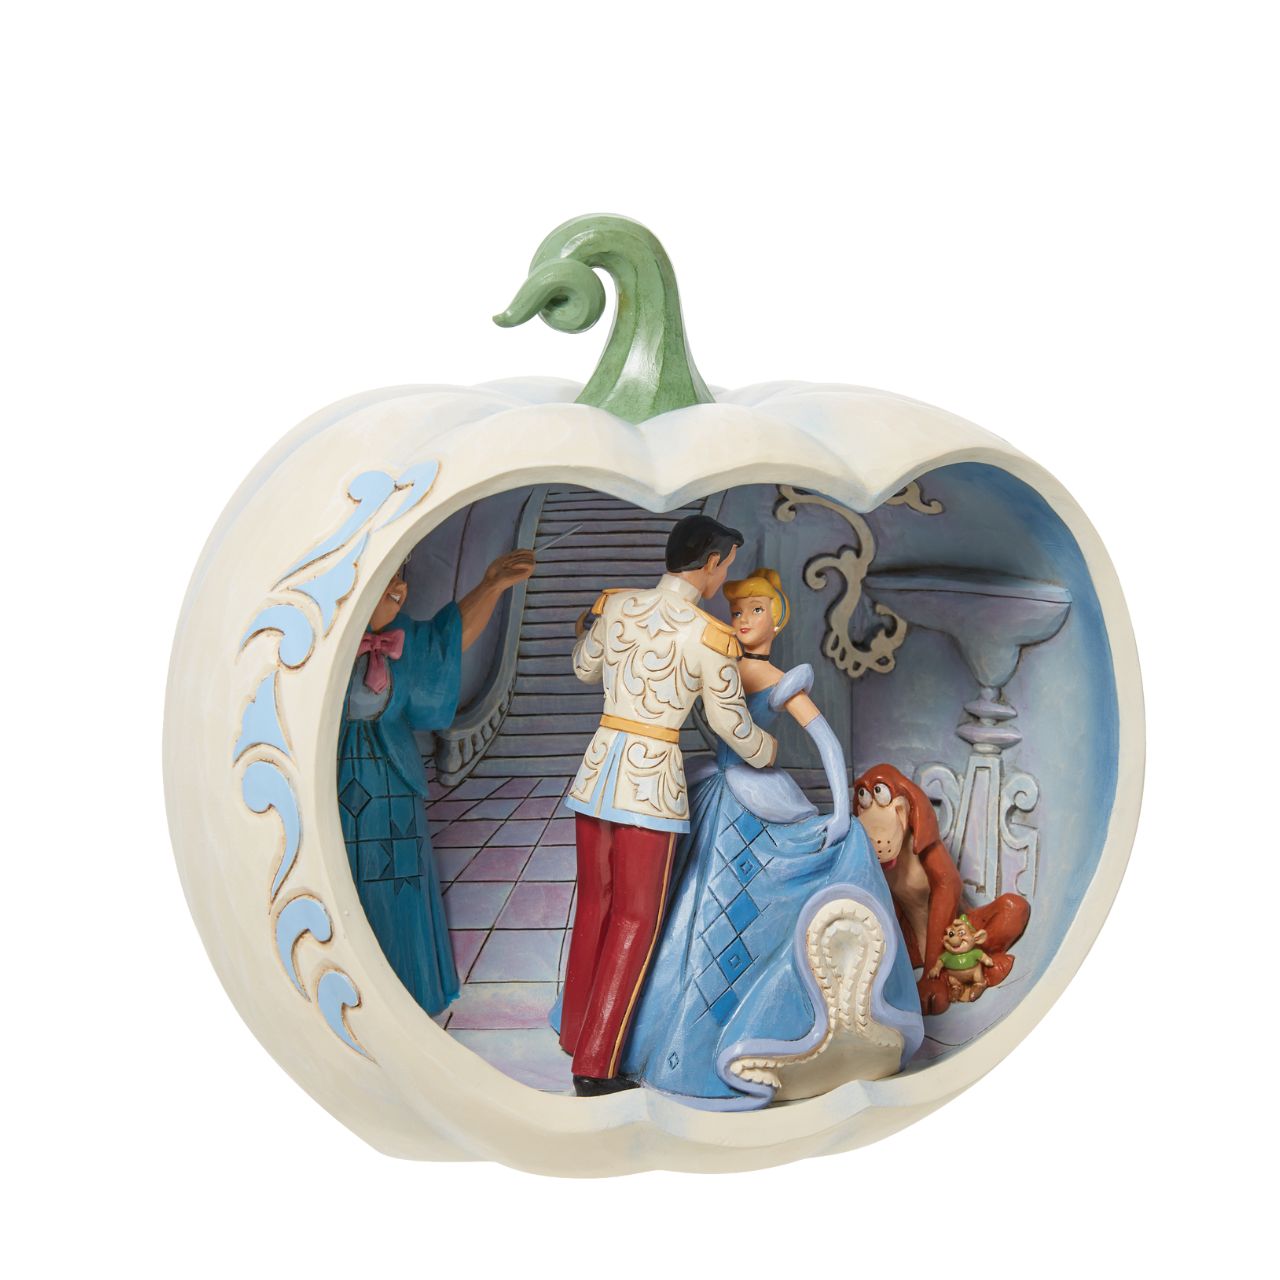 Disney Traditions Cinderella Movie Scene  Cinderella Movie Scene Masterpiece Made from cast stone. Packed in a branded gift box. Unique variations should be expected as this product is hand painted. Not a toy or children's product.